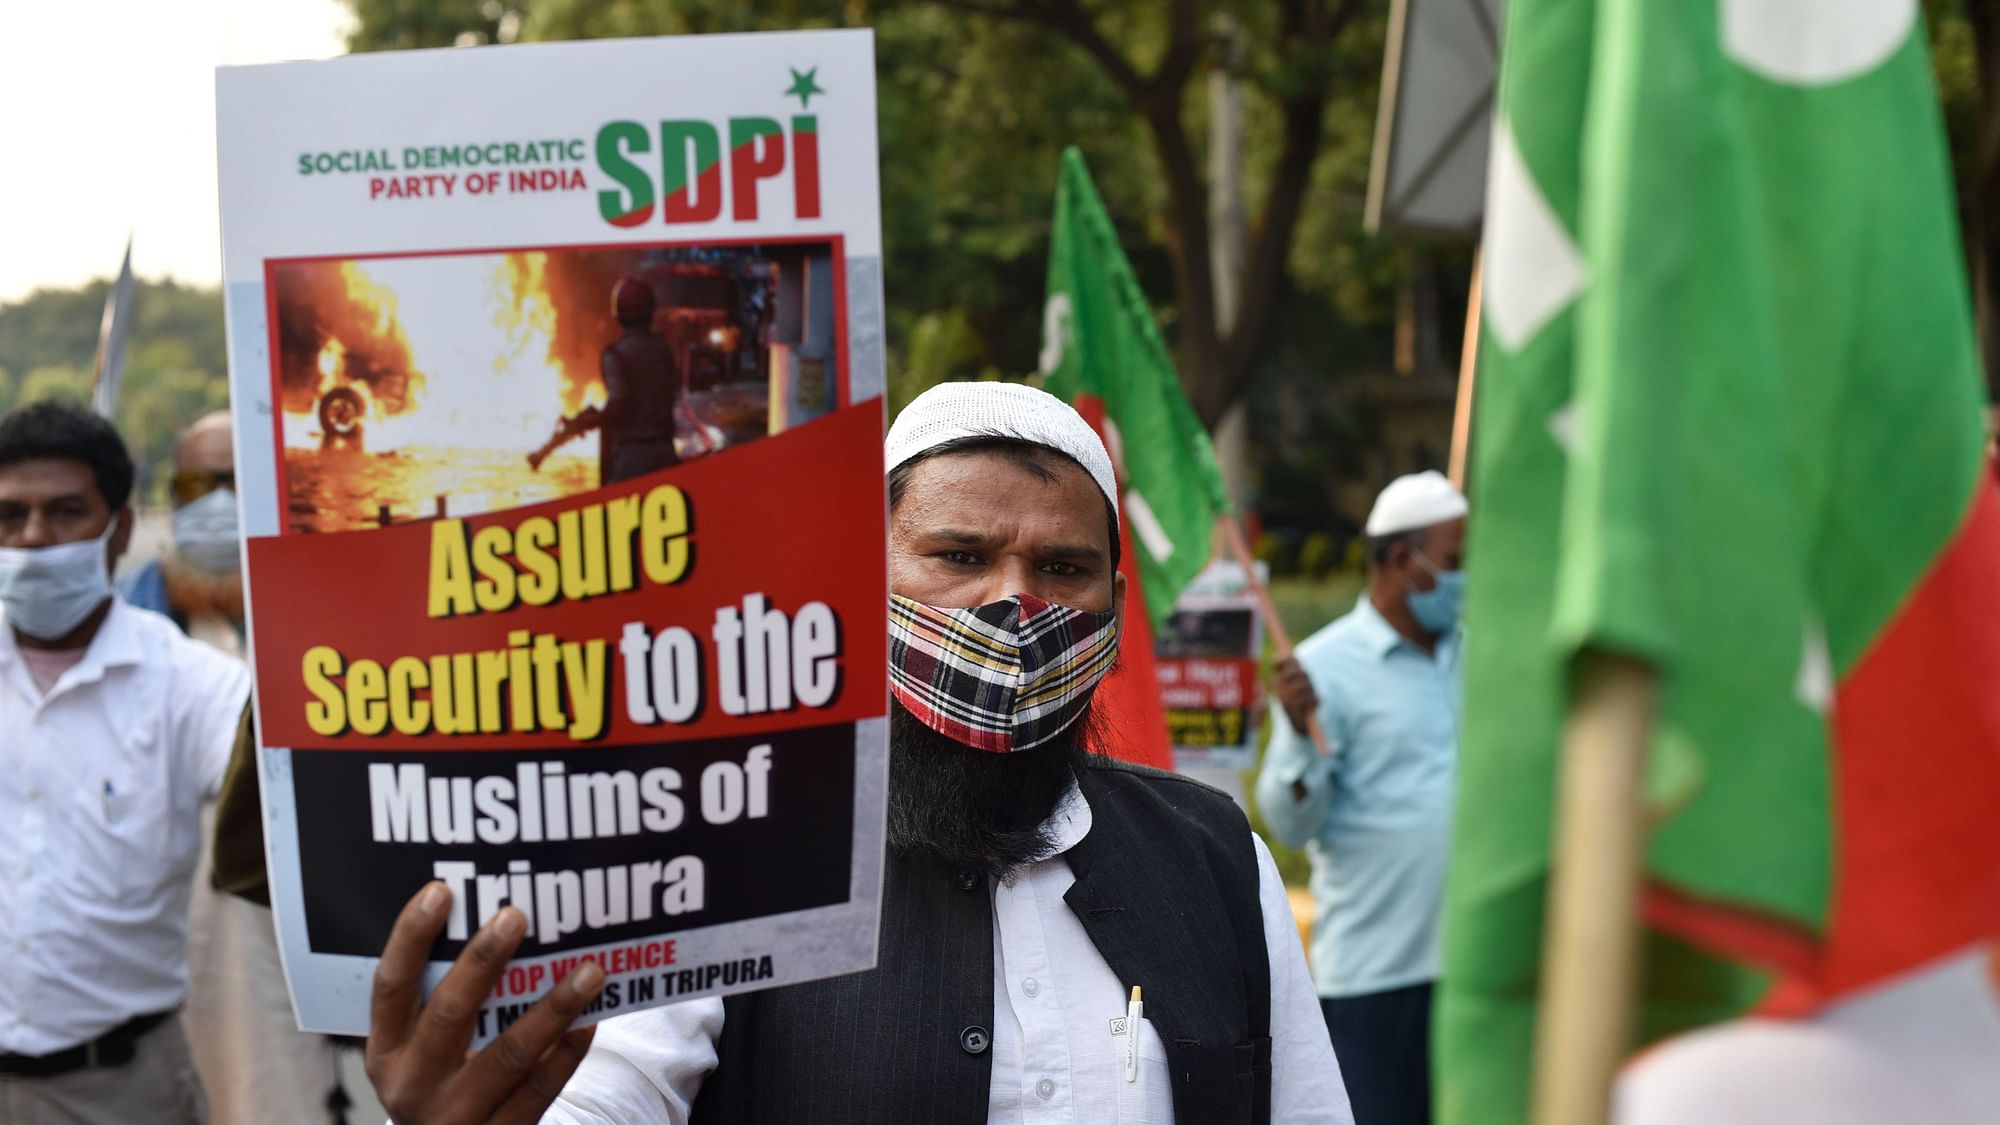 <div class="paragraphs"><p>Social Democratic Party of India (SDPI) members stage a protest against Tripura violence outside the Tripura Bhawan, in New Delhi, on Friday, 29 October.</p></div>